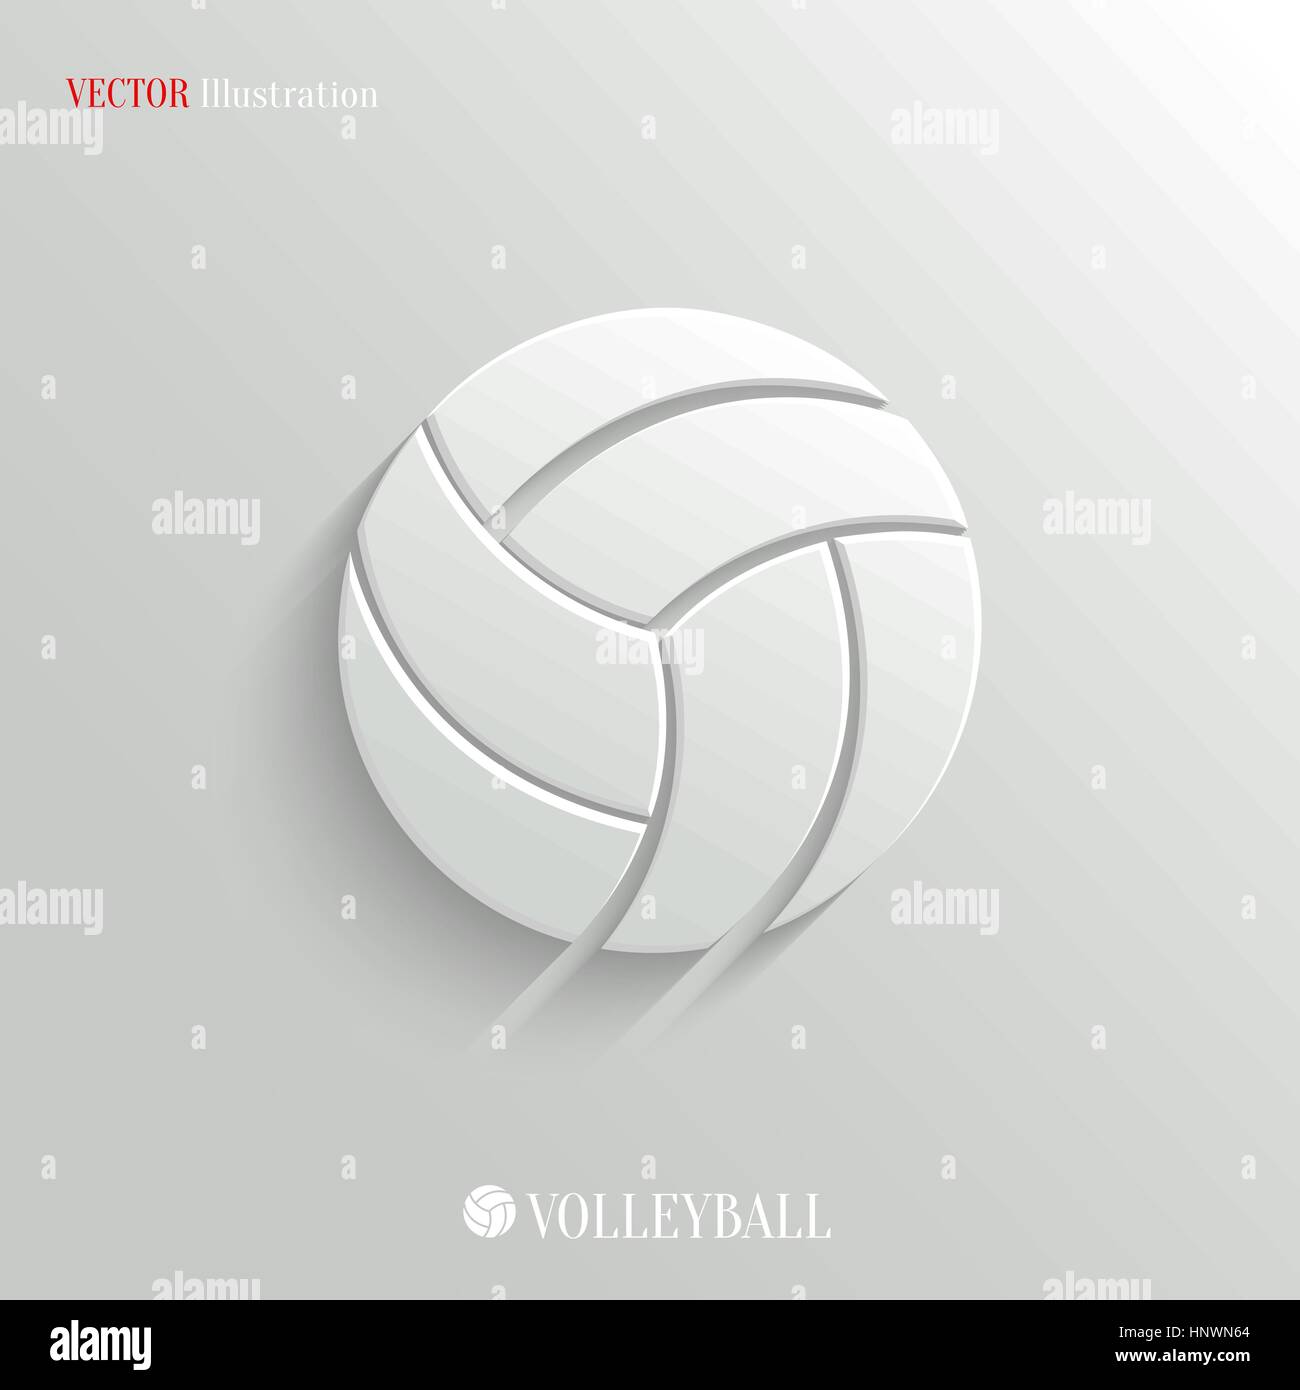 Volleyball background Stock Vector Images - Alamy